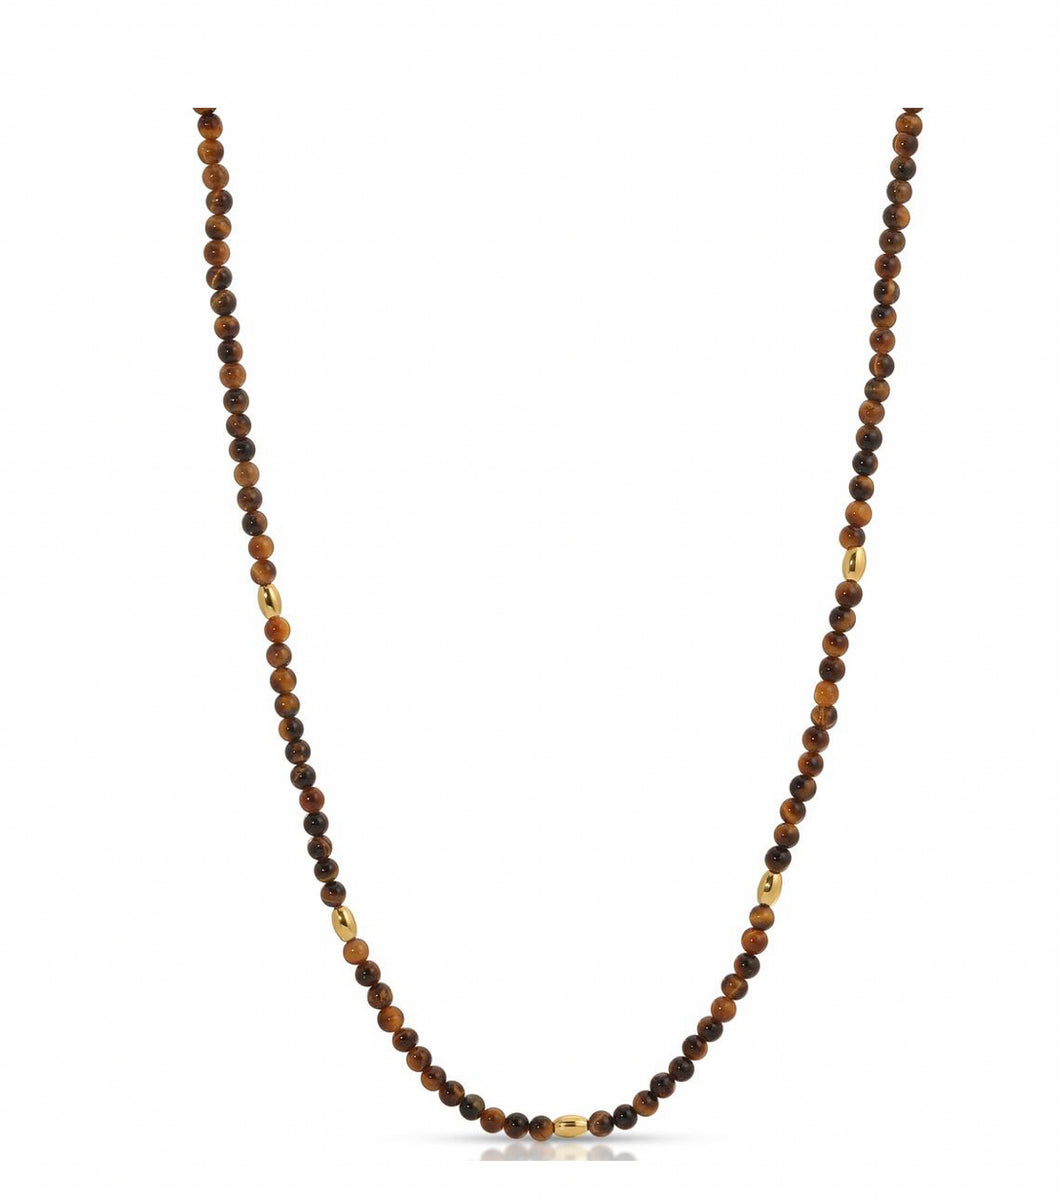 Bali Beaded Necklace Tiger’s Eye